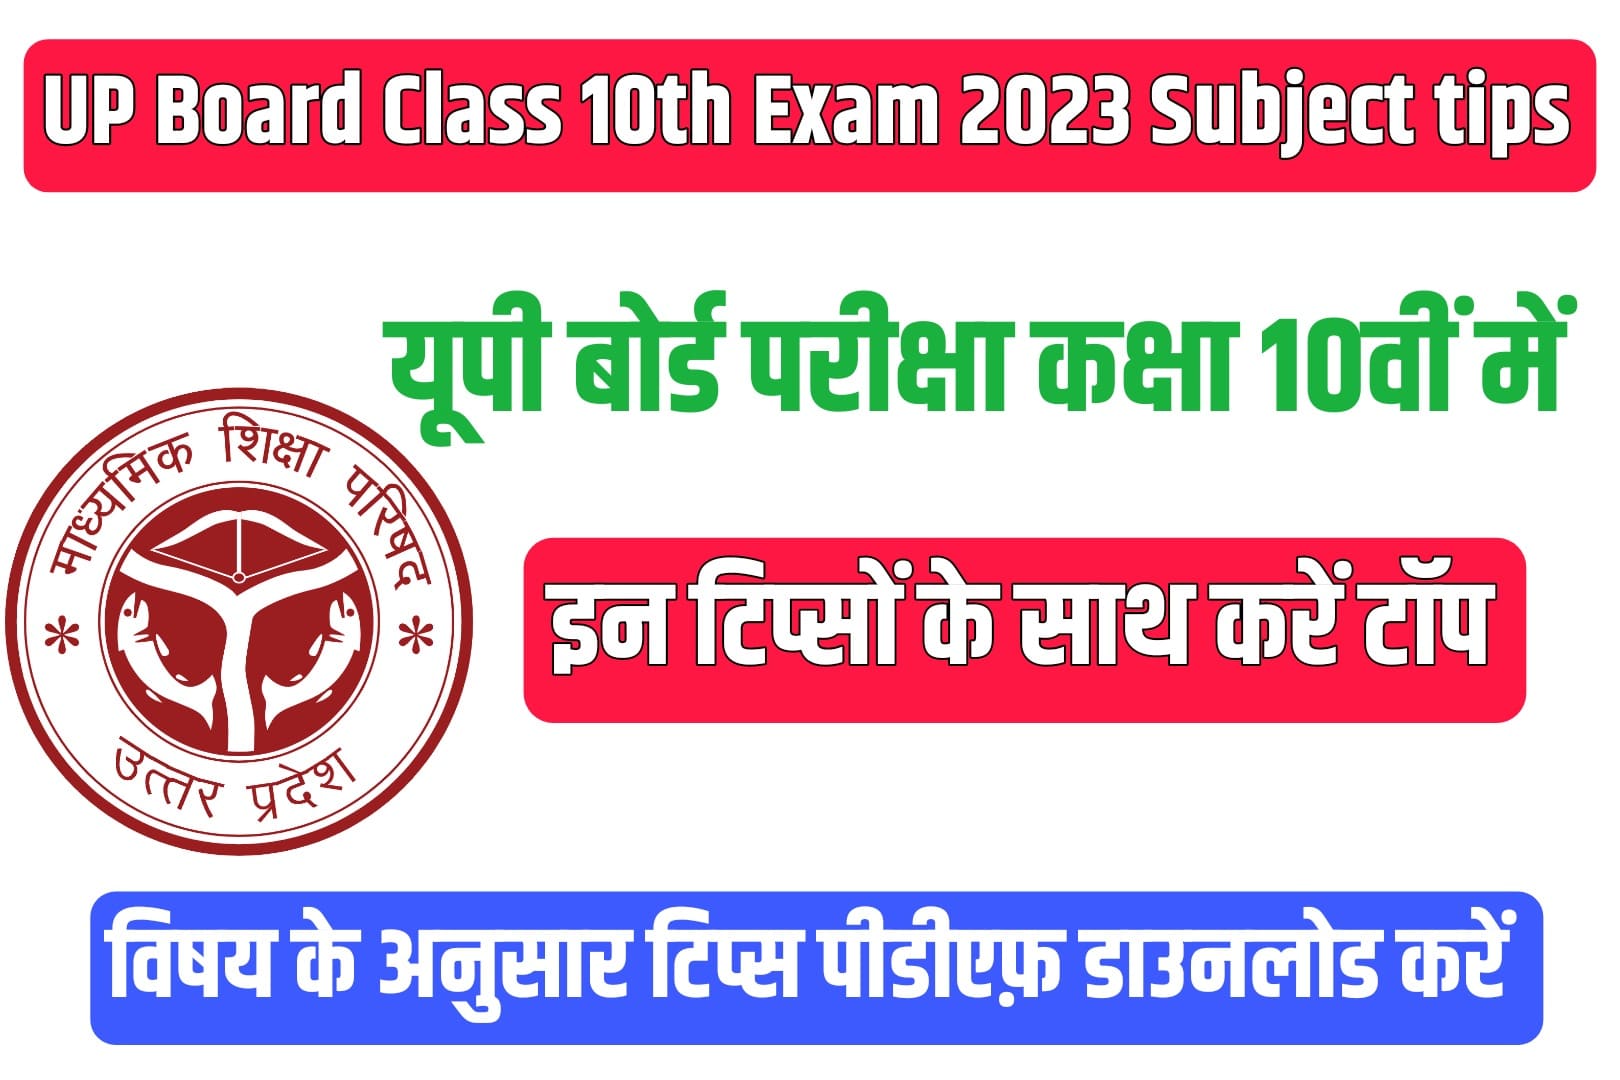 UP Board Class 10th Exam 2023 Subject tips